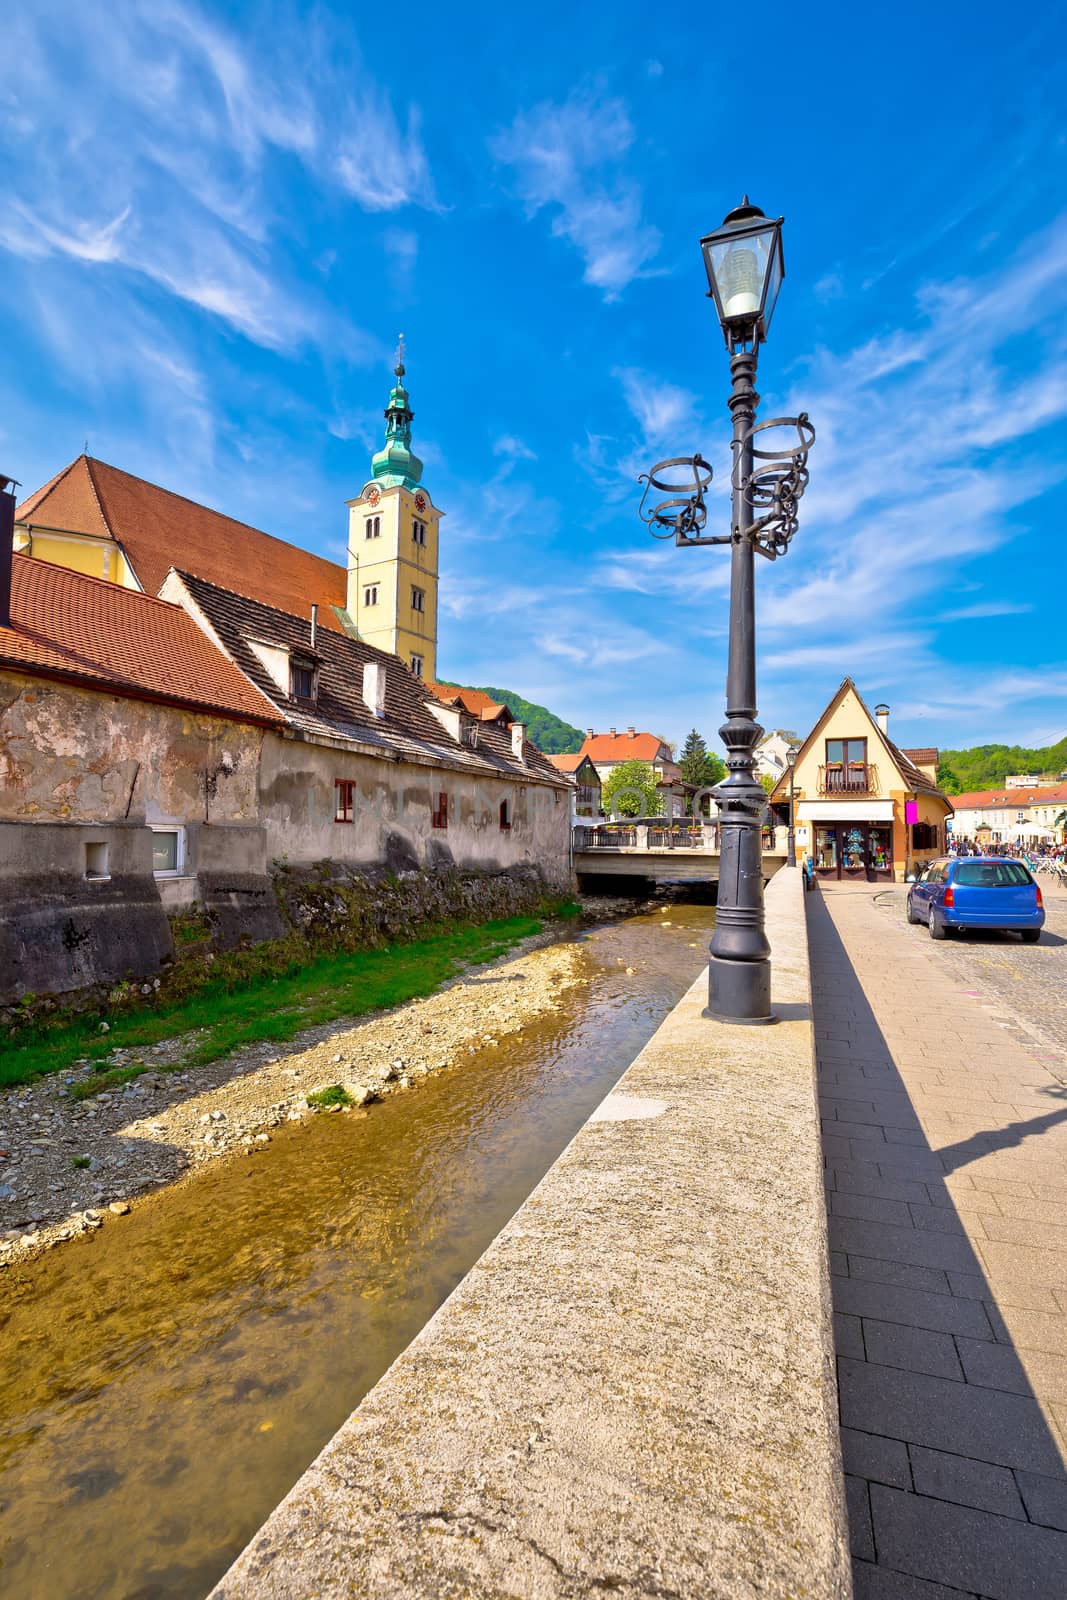 Town of Samobor architecture vertical view, northern Croatia